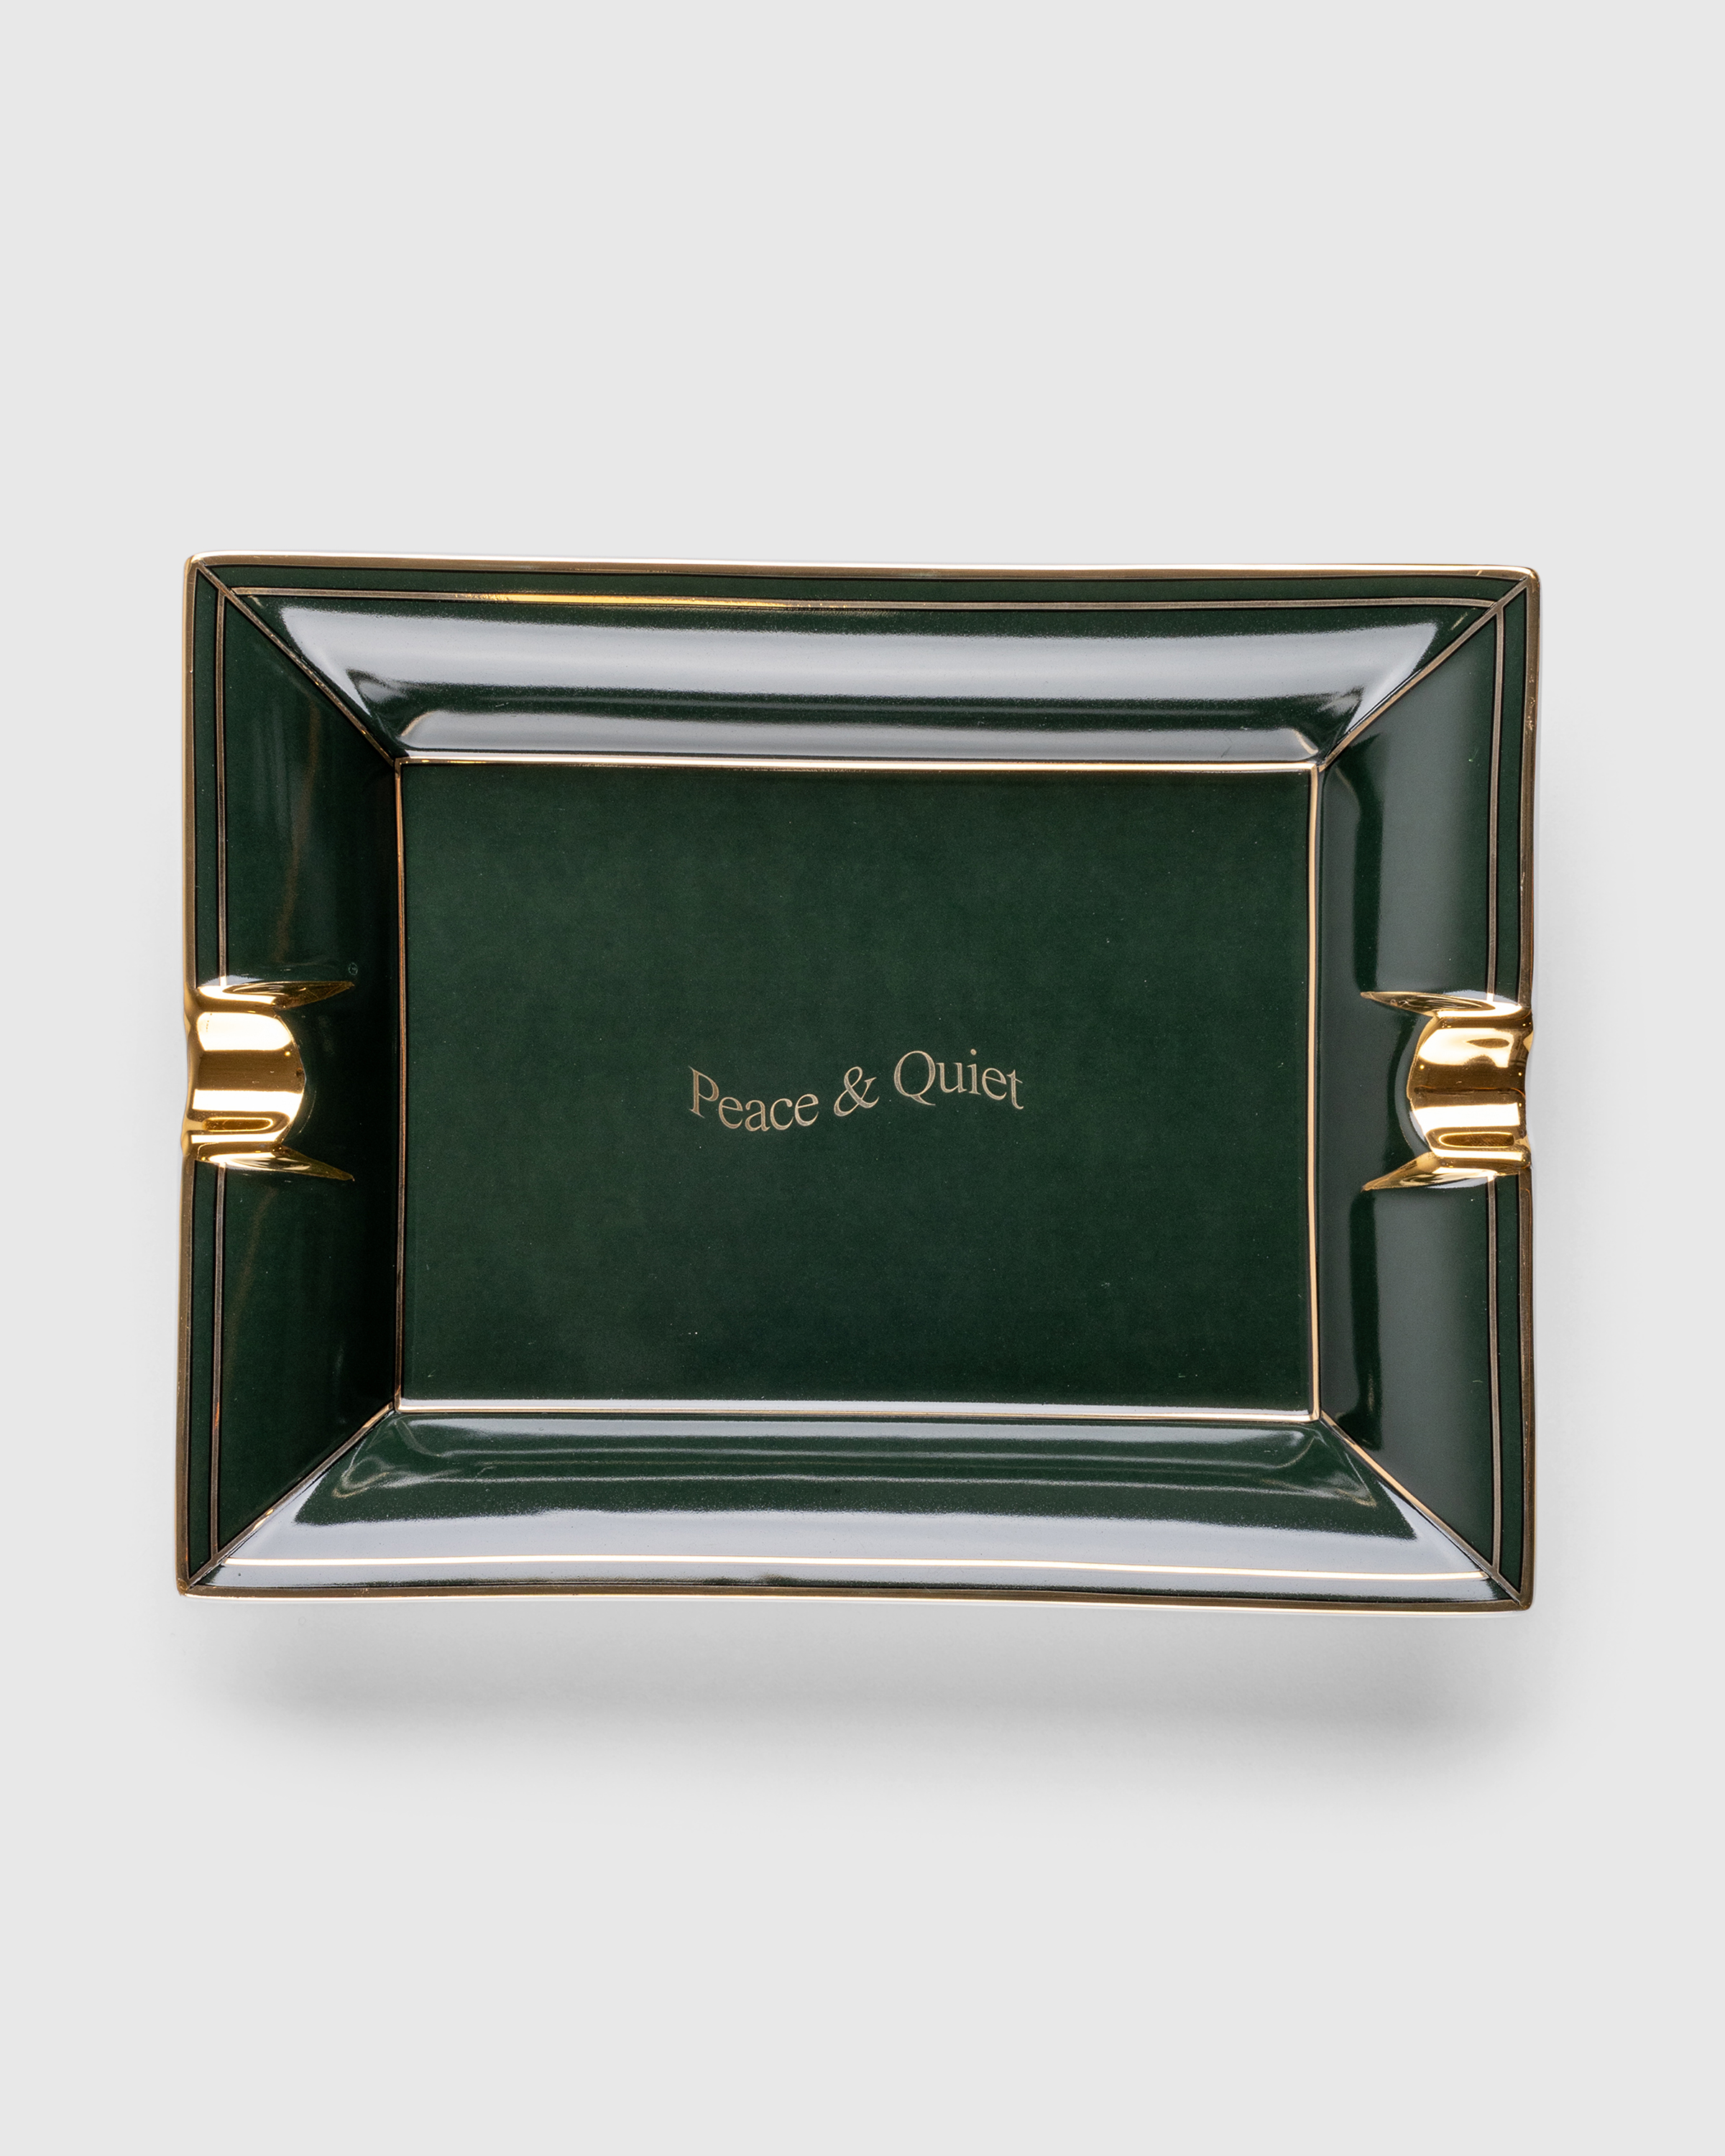 Museum of Peace & Quiet – Wordmark Ash Tray Forest - Ashtrays - Green - Image 1